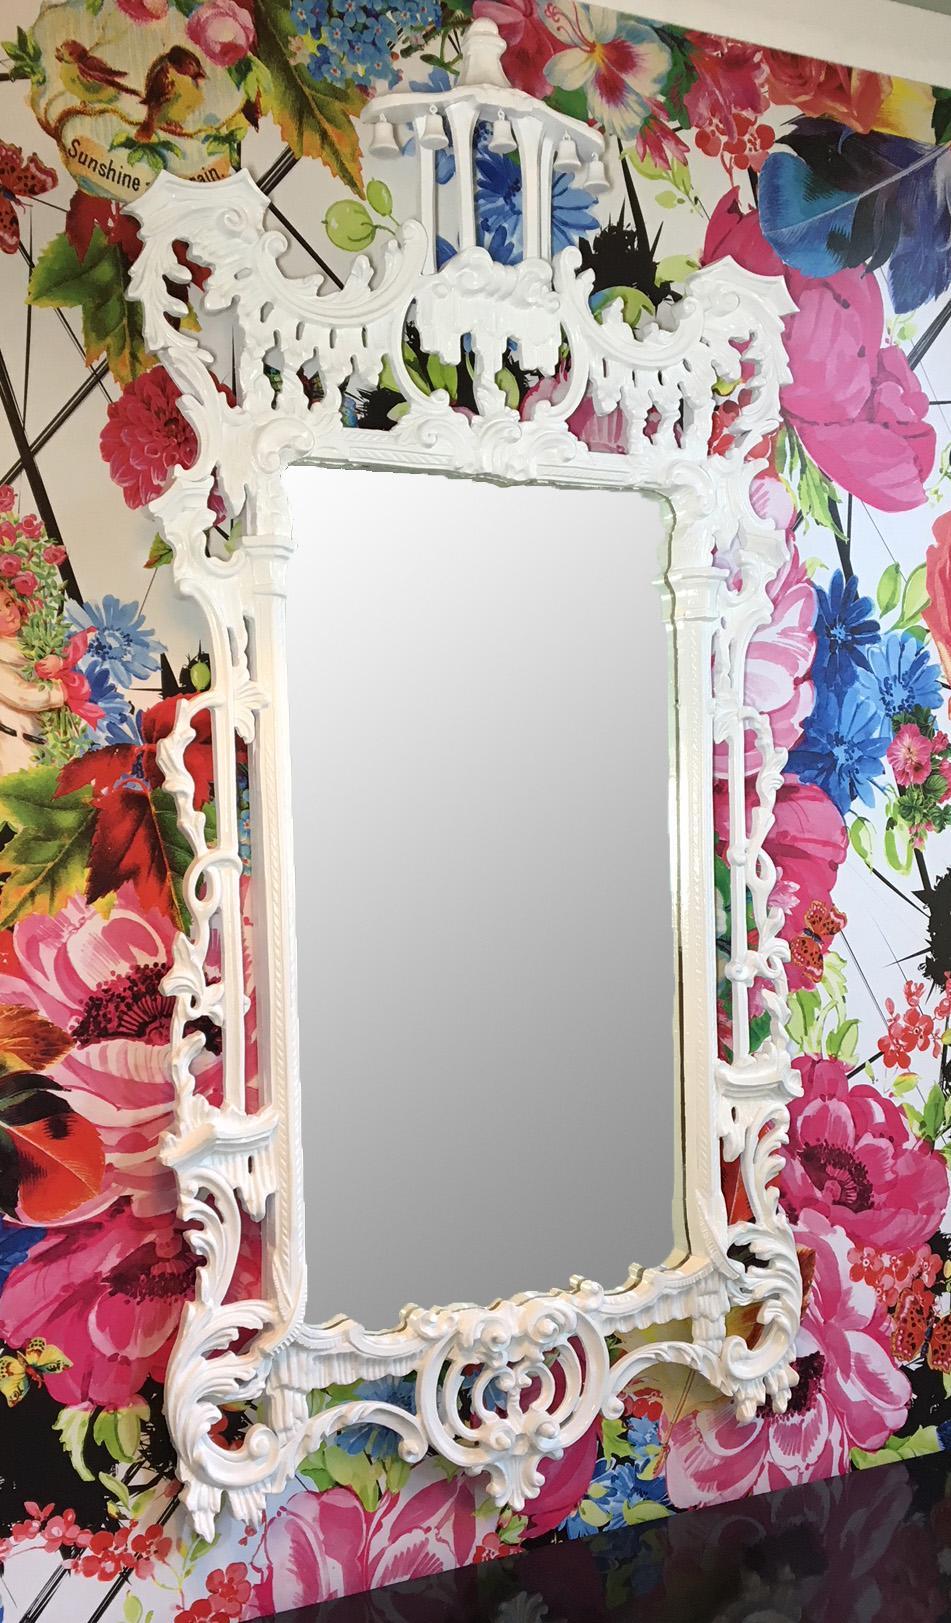 Chinese Chippendale wall mirror perfect for your Hollywood Regency decor. Newly lacquered in gloss white. Excellent vintage condition with no flaws.
As always, all reasonable offers will be considered.